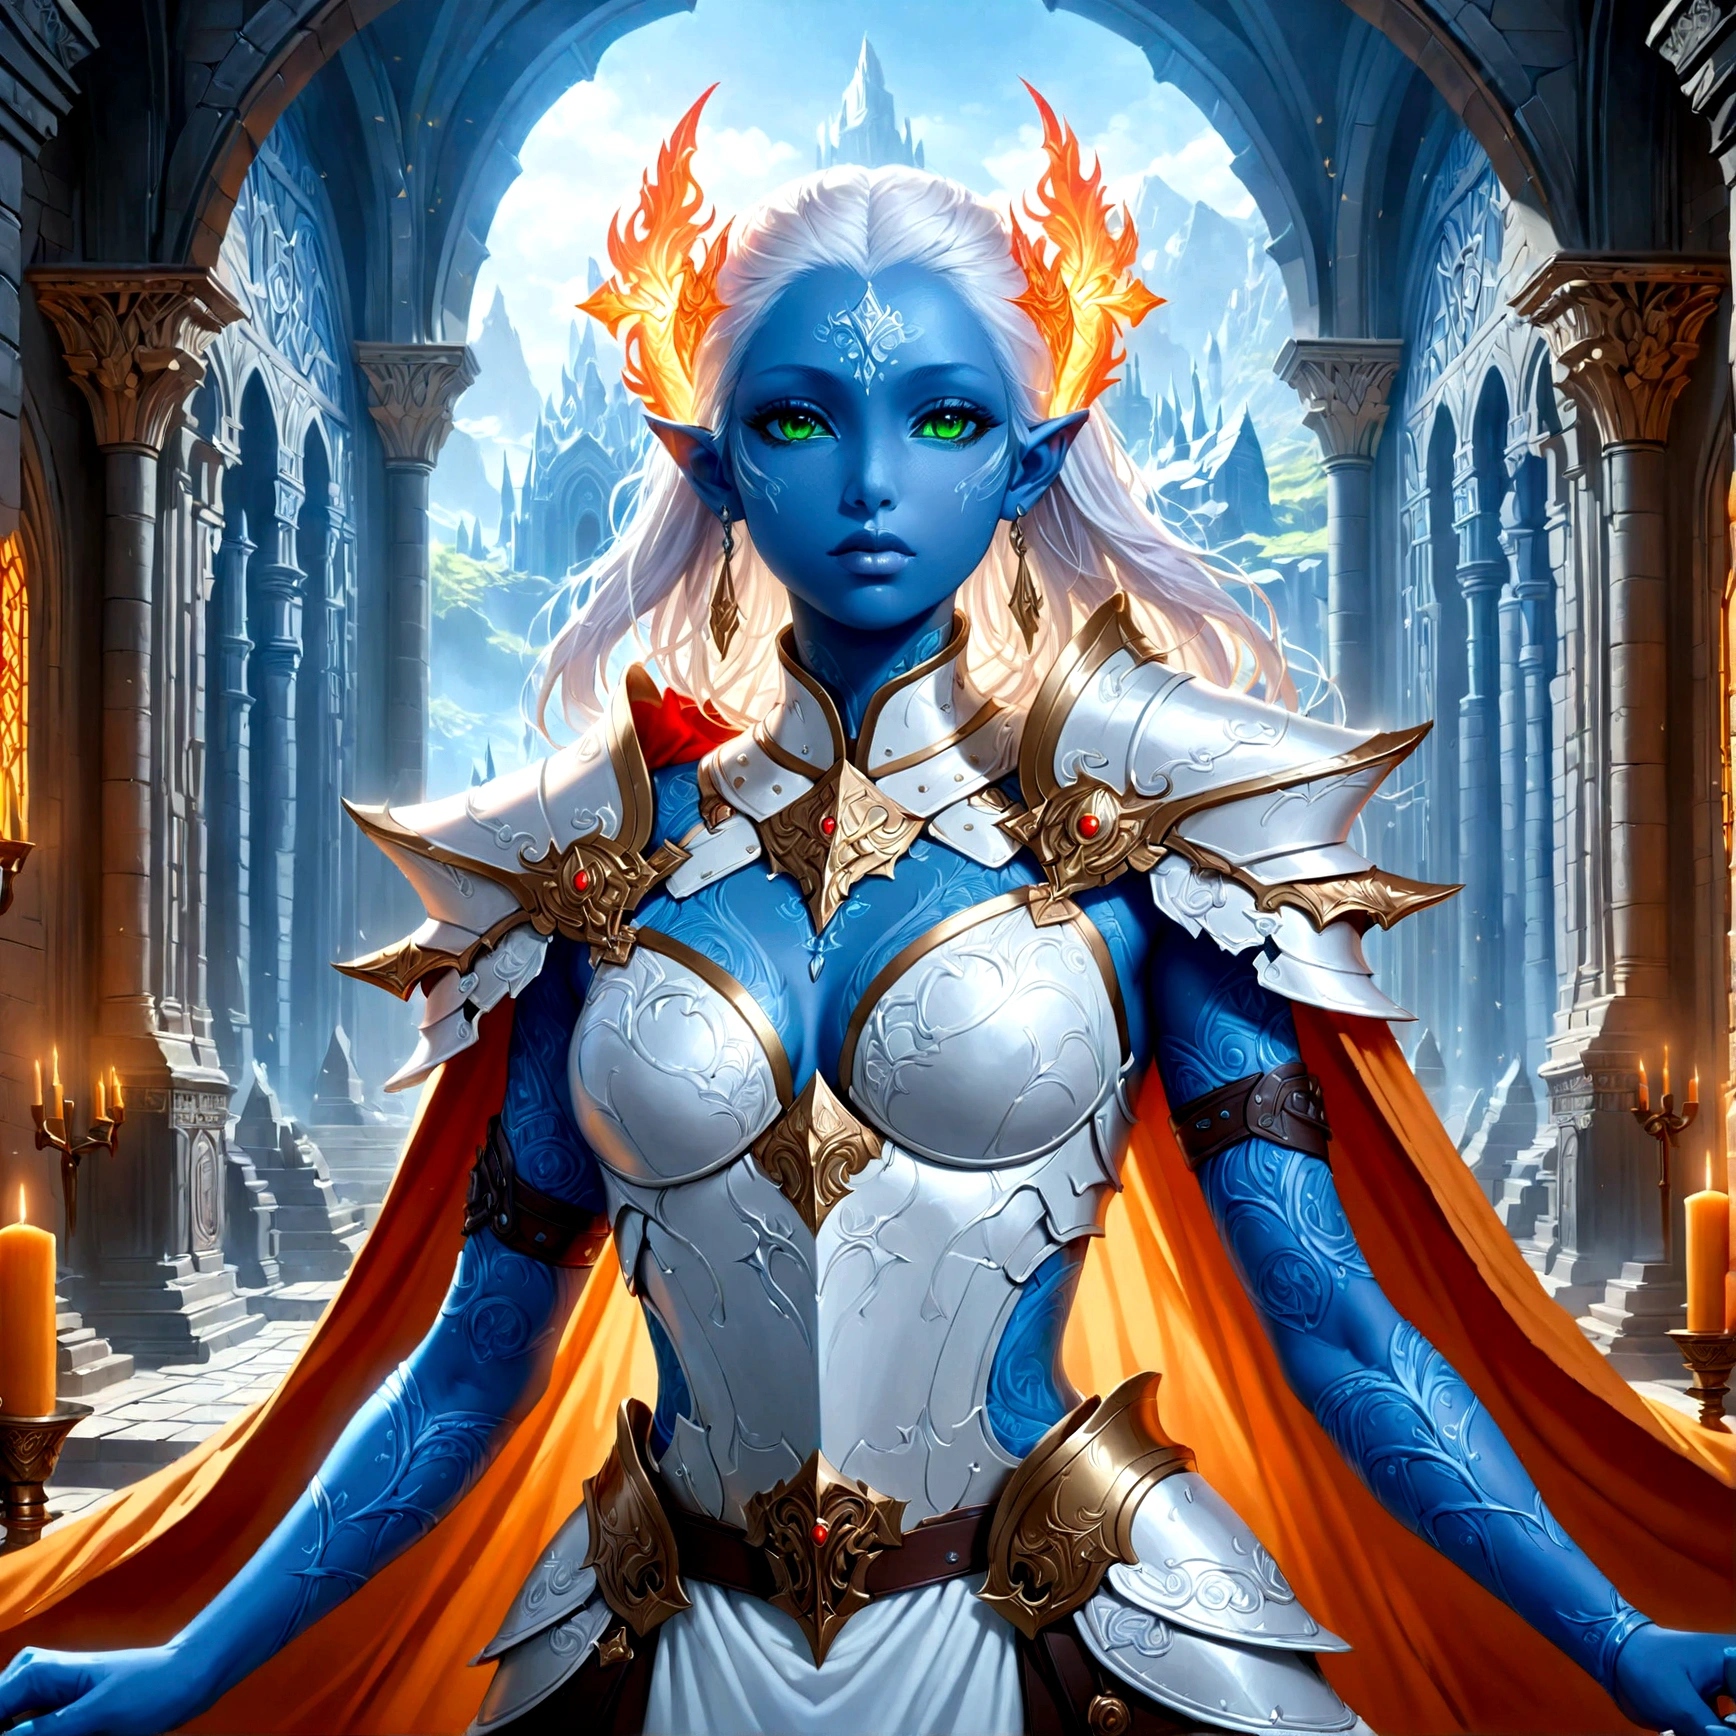 fantasy art, dnd art, RPG art, wide shot, (masterpiece: 1.4) a (portrait: 1.3) intense details, highly detailed, photorealistic, best quality, highres, portrait a female (fantasy art, Masterpiece, best quality: 1.3) ((blue skin: 1.5)), intense details facial details, exquisite beauty, (fantasy art, Masterpiece, best quality) cleric, (blue skinned: 1.3)  female, white hair, long hair, (no ears: 1.5), (green eyes: 1.3), armed with a fiery sword red fire, wearing heavy (white armor: 1.3), wearing high heeled laced boots, wearing an (orange cloak:1.3), wearing glowing holy symbol GlowingRunes_yellow, within fantasy temple background, reflection light, high details, best quality, 16k, [ultra detailed], masterpiece, best quality, (extremely detailed), close up, ultra wide shot, photorealistic, RAW, fantasy art, dnd art, fantasy art, realistic art,((best quality)), ((masterpiece)), (detailed), perfect face, 